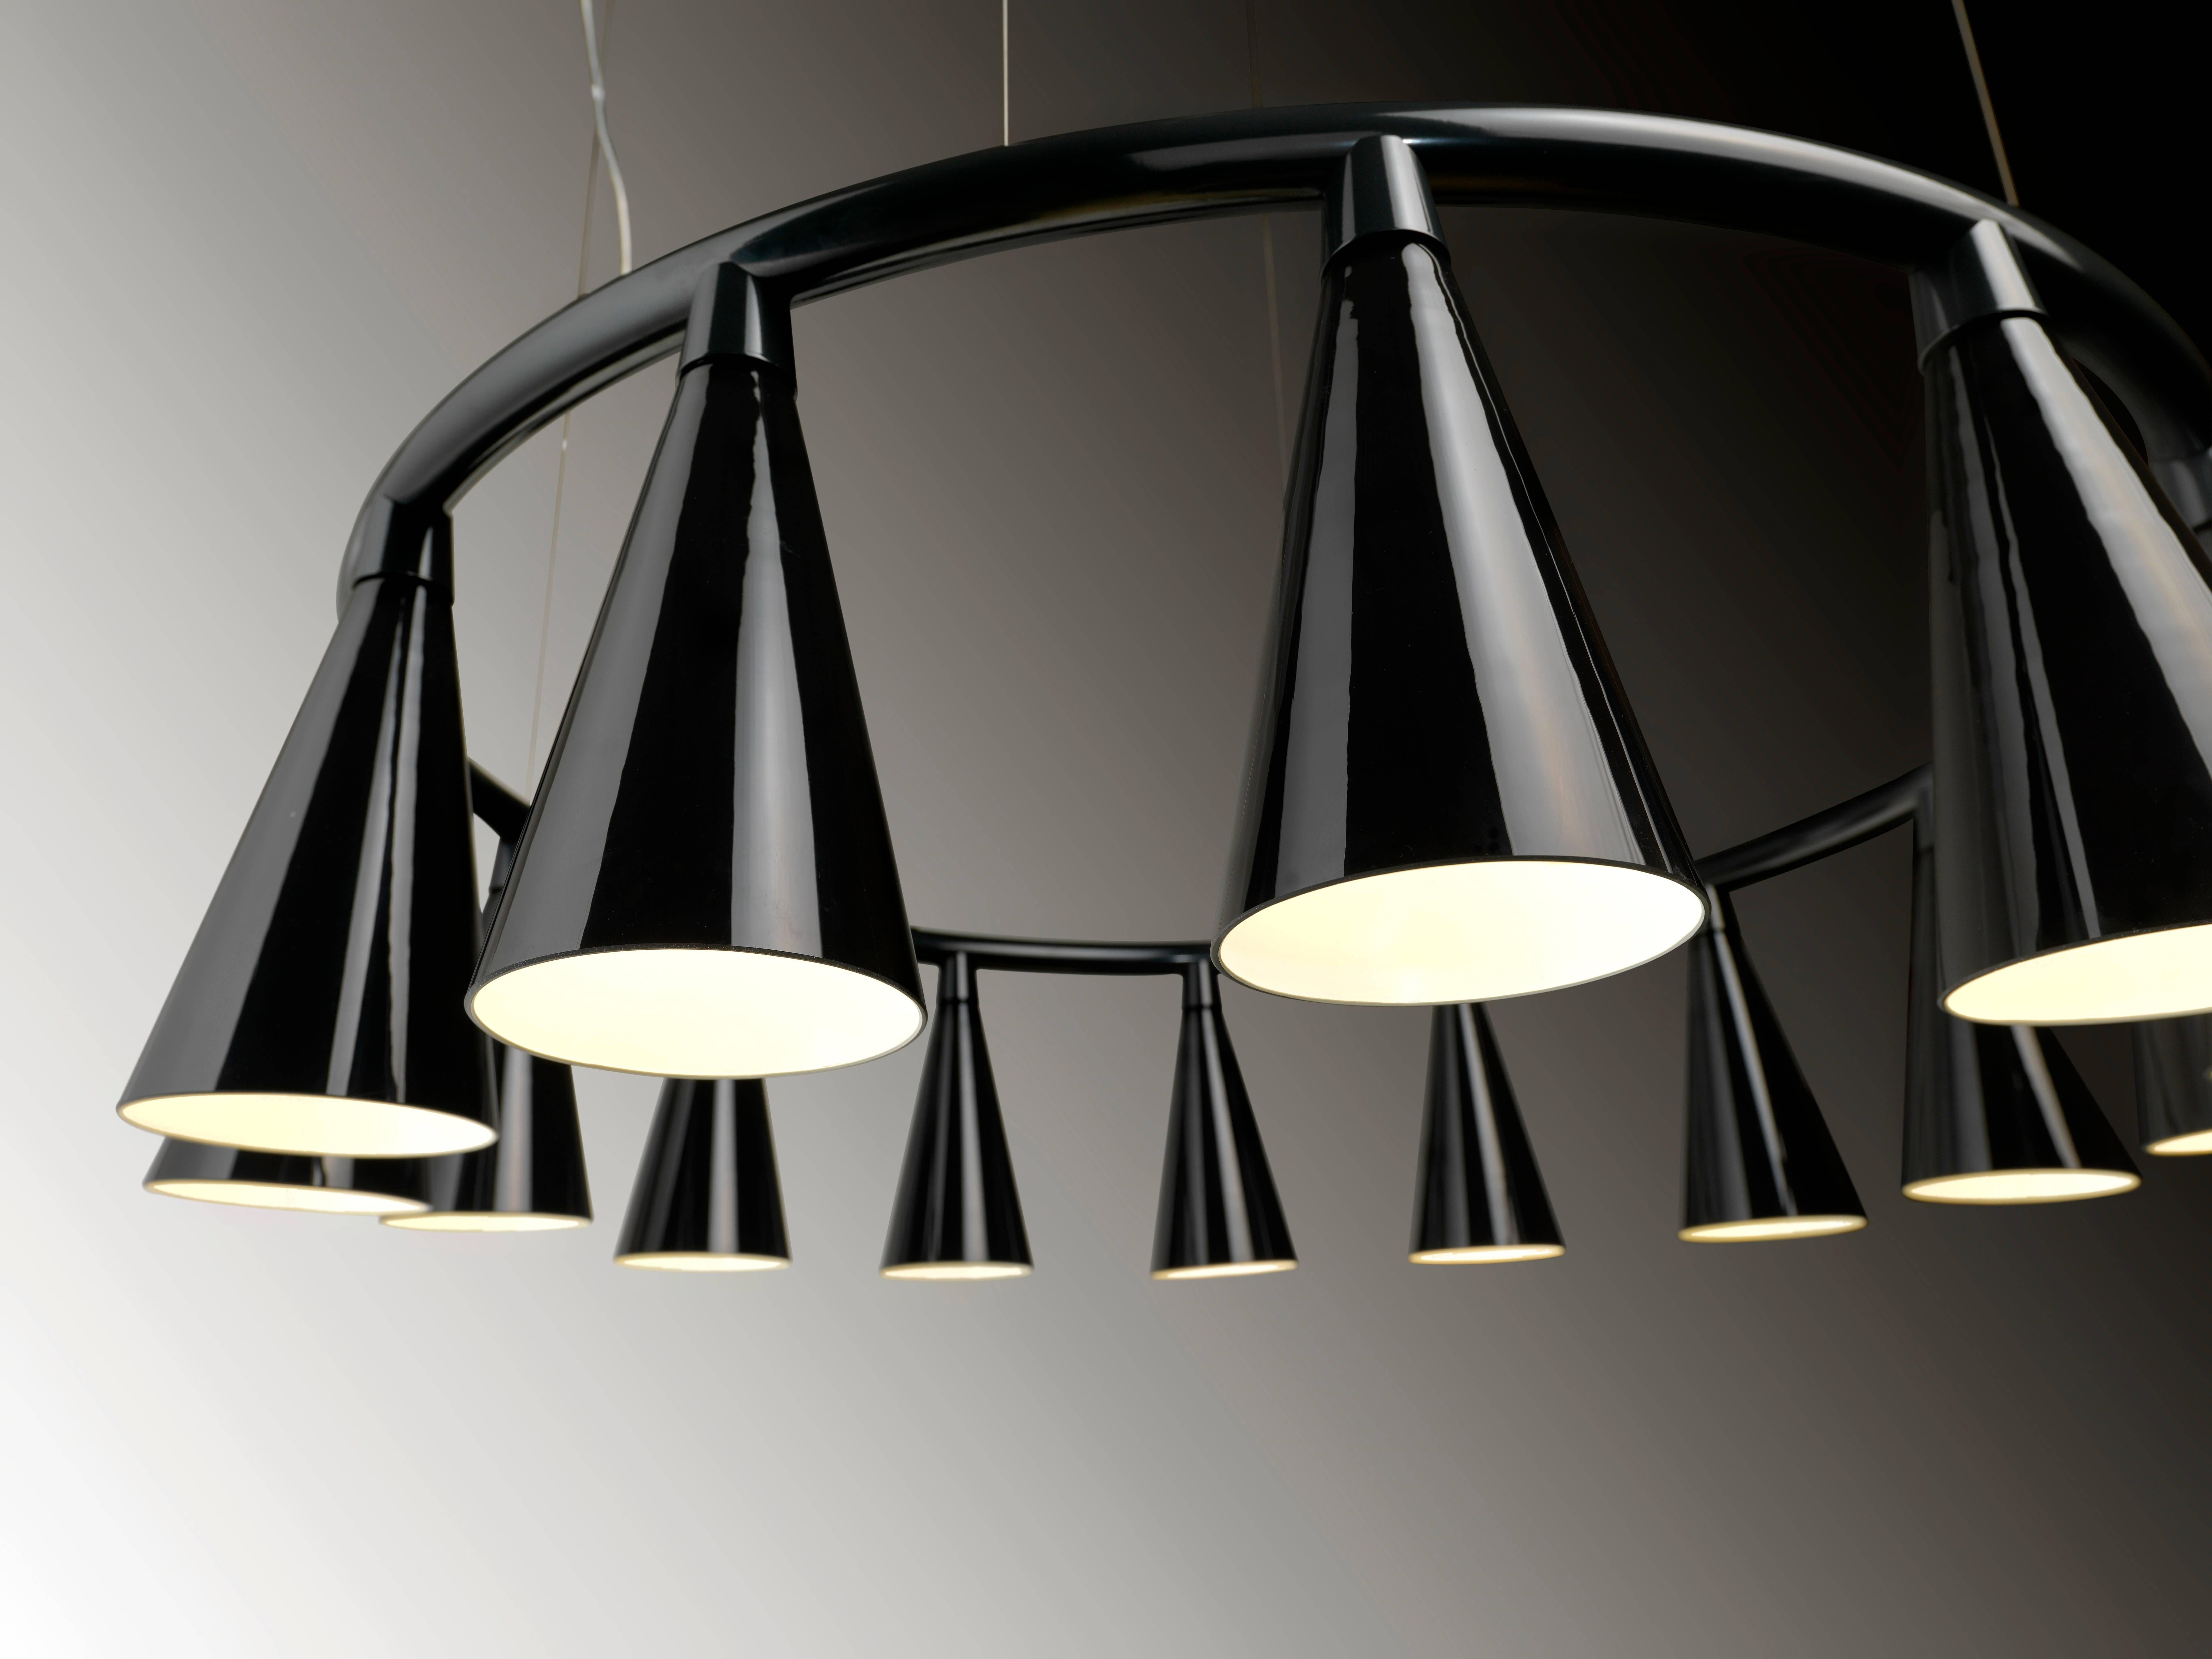 Komori: A chandelier reminiscent of a colony of bats hanging upside down from a tree branch or the ceiling of a cave. Evenly spaced glass shades blown by Murano glass artisans enclose LEDs, and cast their light downwards. Bases can be connected to